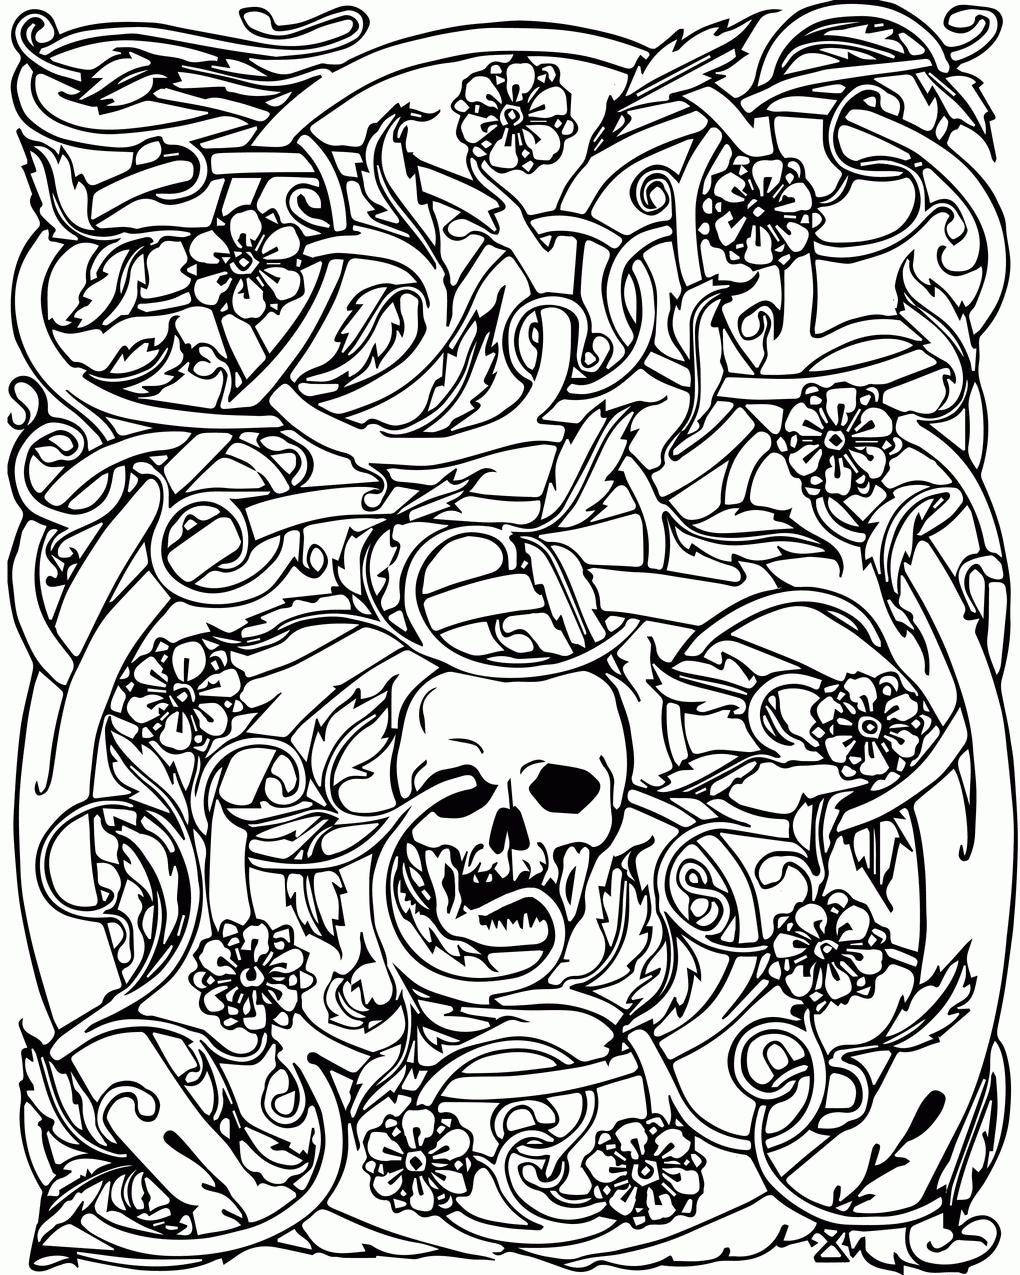 Free Adult Halloween Coloring Pages Â» Coloring Pages Kids - Coloring Home